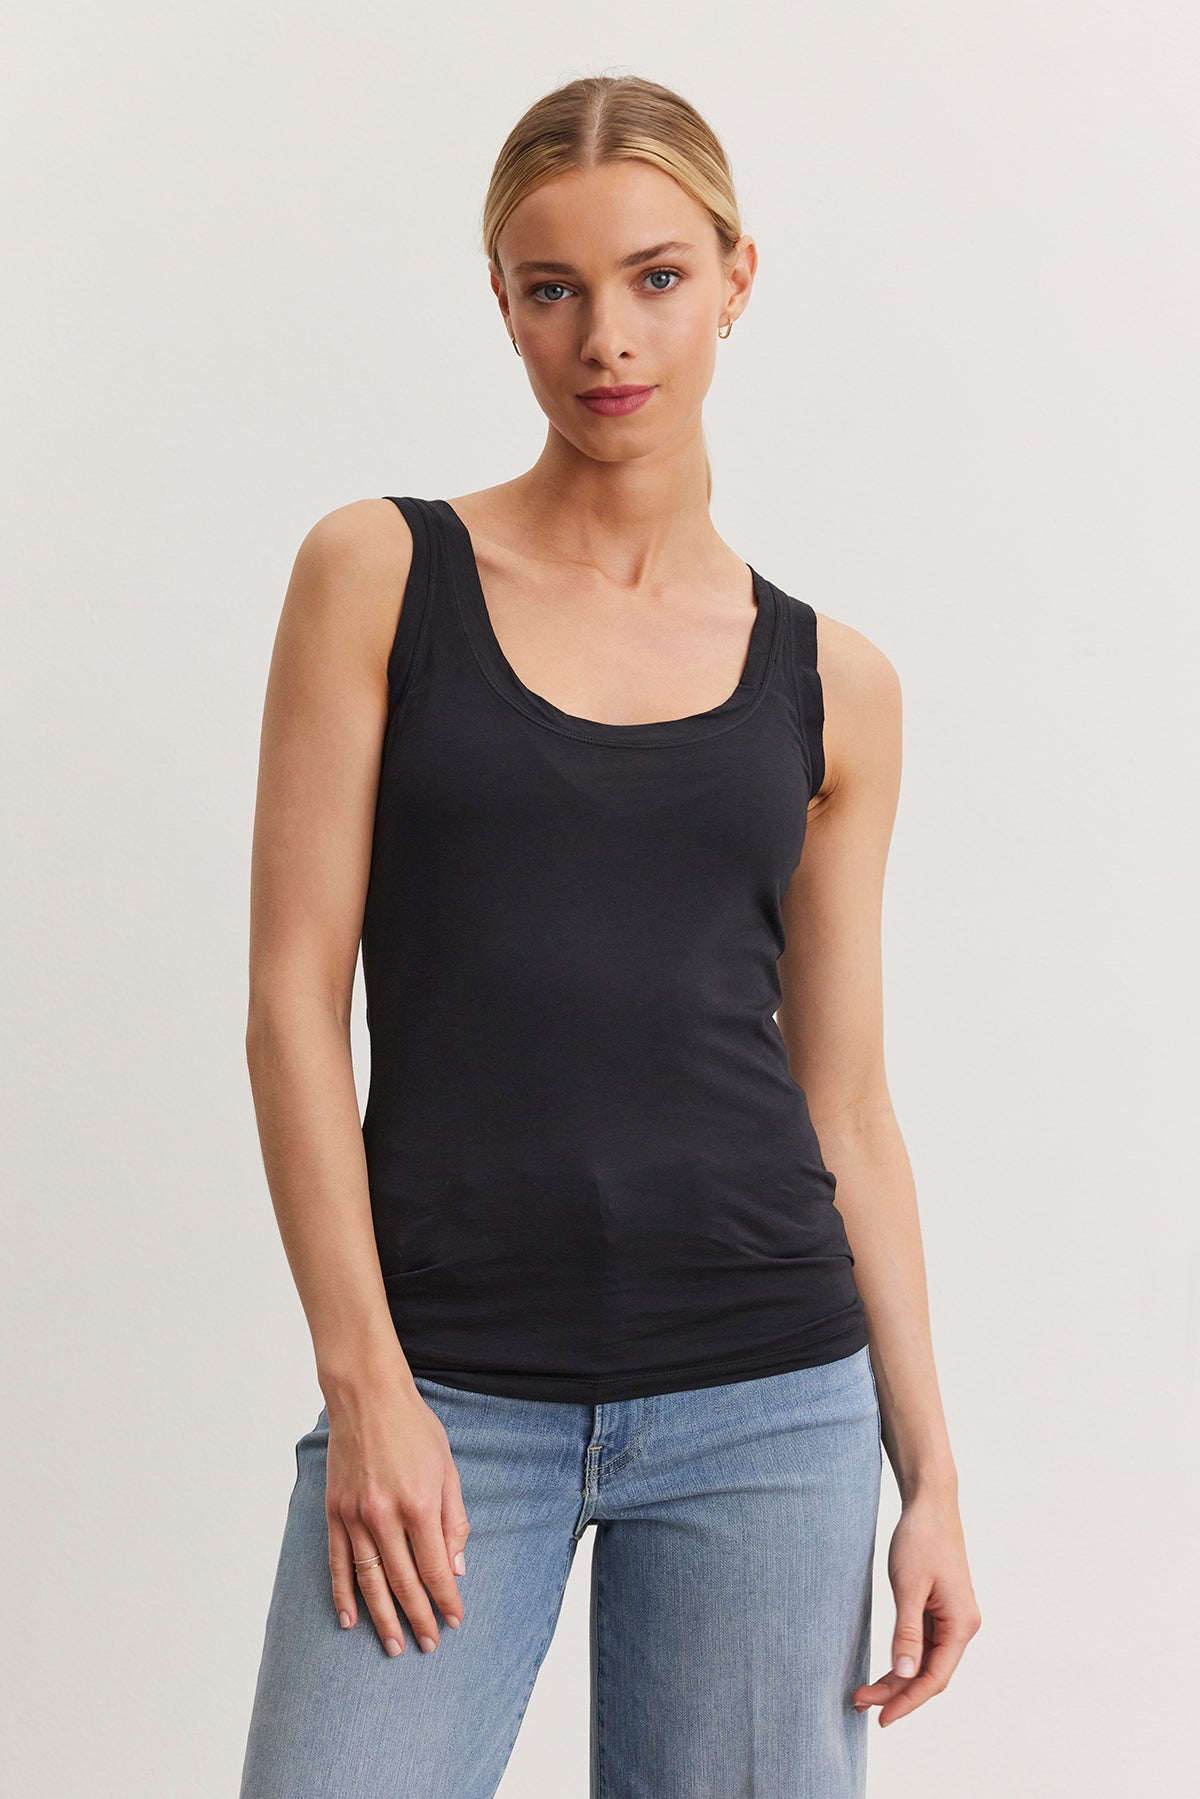 A person stands against a plain white background wearing a fitted MOSSY TANK TOP by Velvet by Graham & Spencer and blue jeans, showcasing the versatility of their wardrobe.-36984052973761